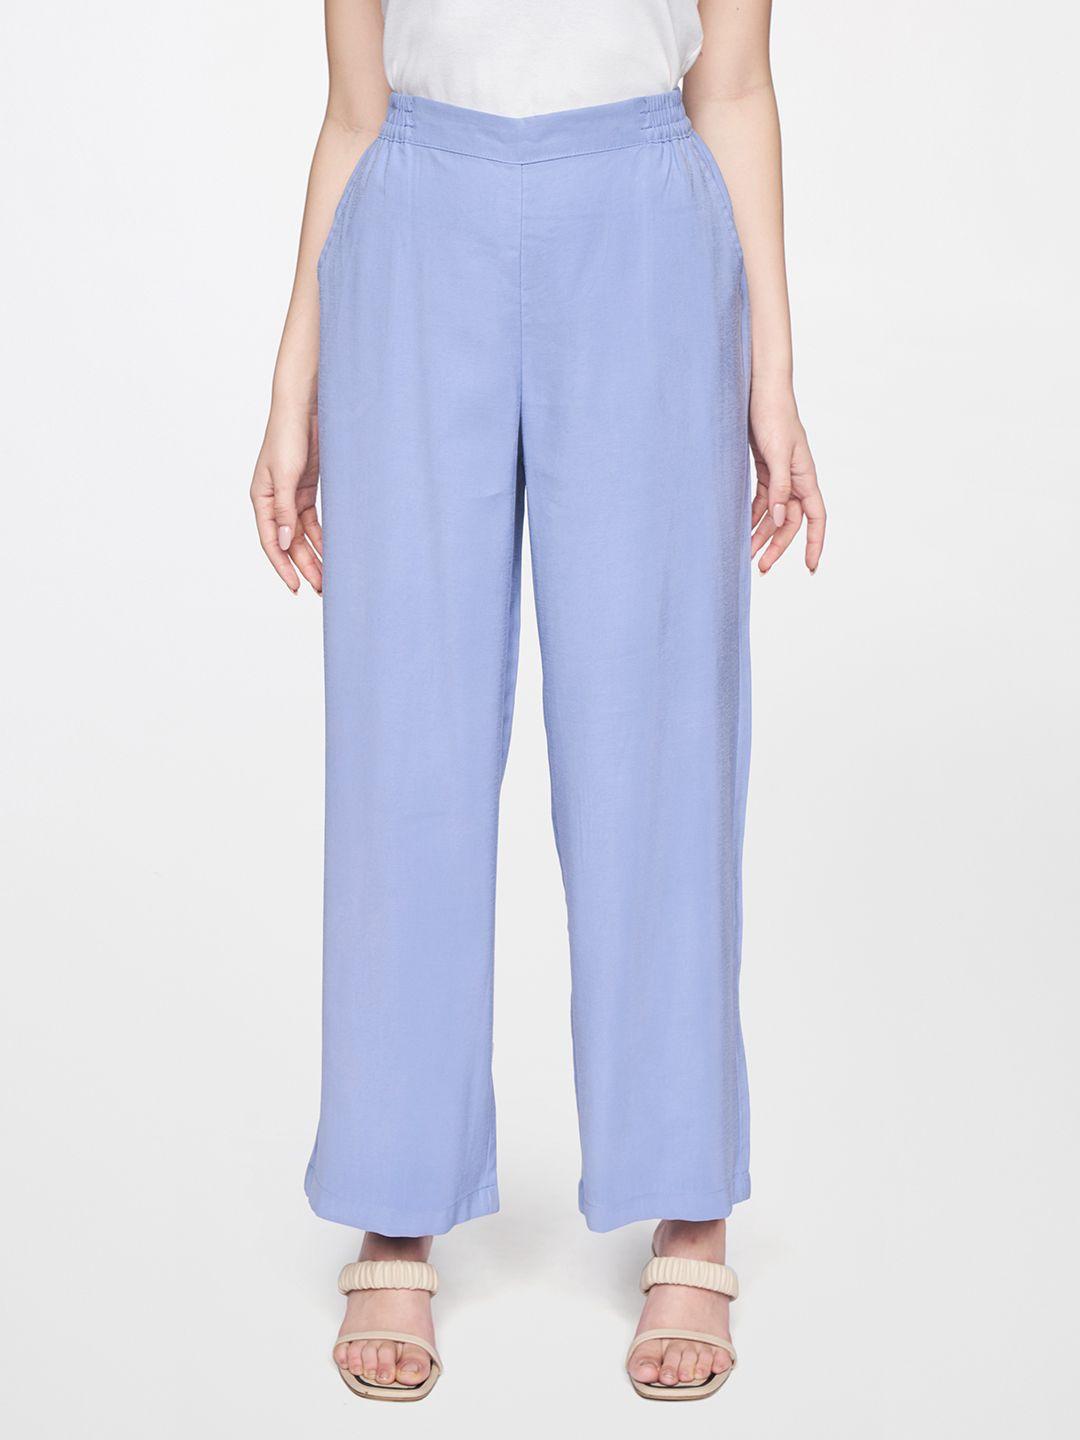 AND Women Blue Straight Fit Trousers